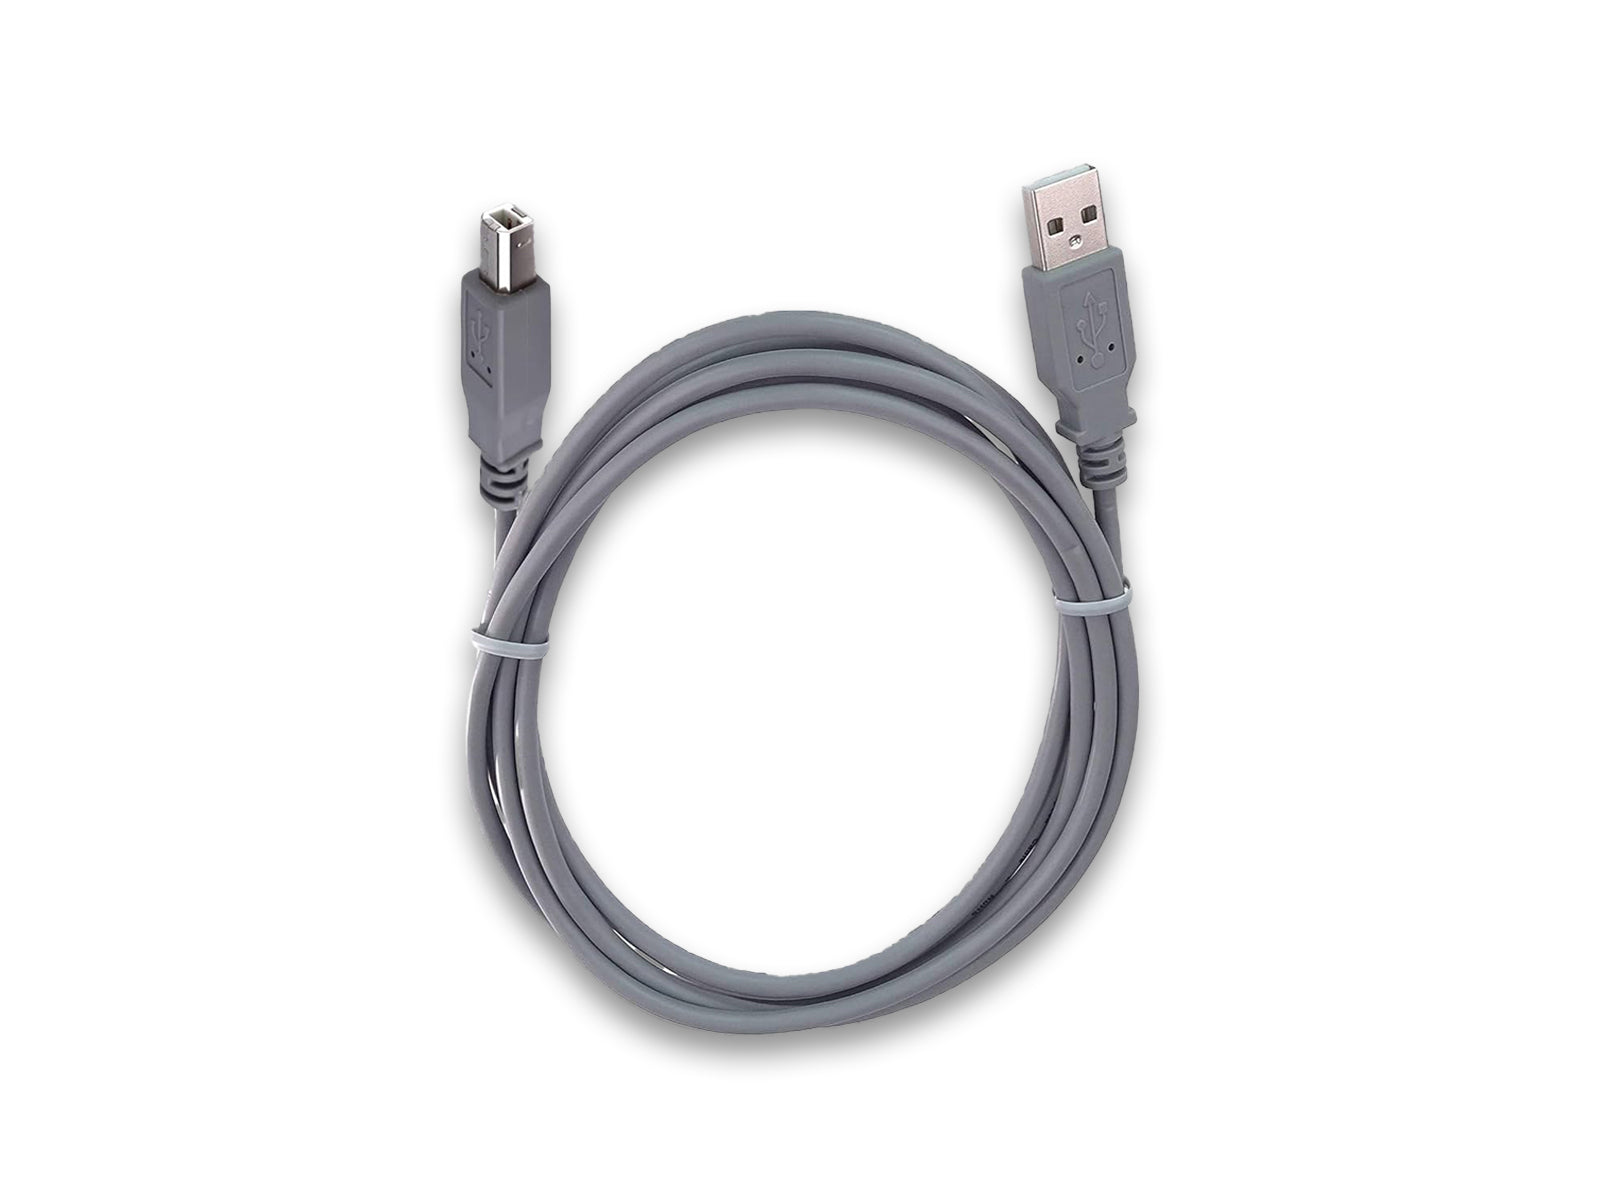 USB Printer Cable (1.5m) Connect a USB Printer to a PC